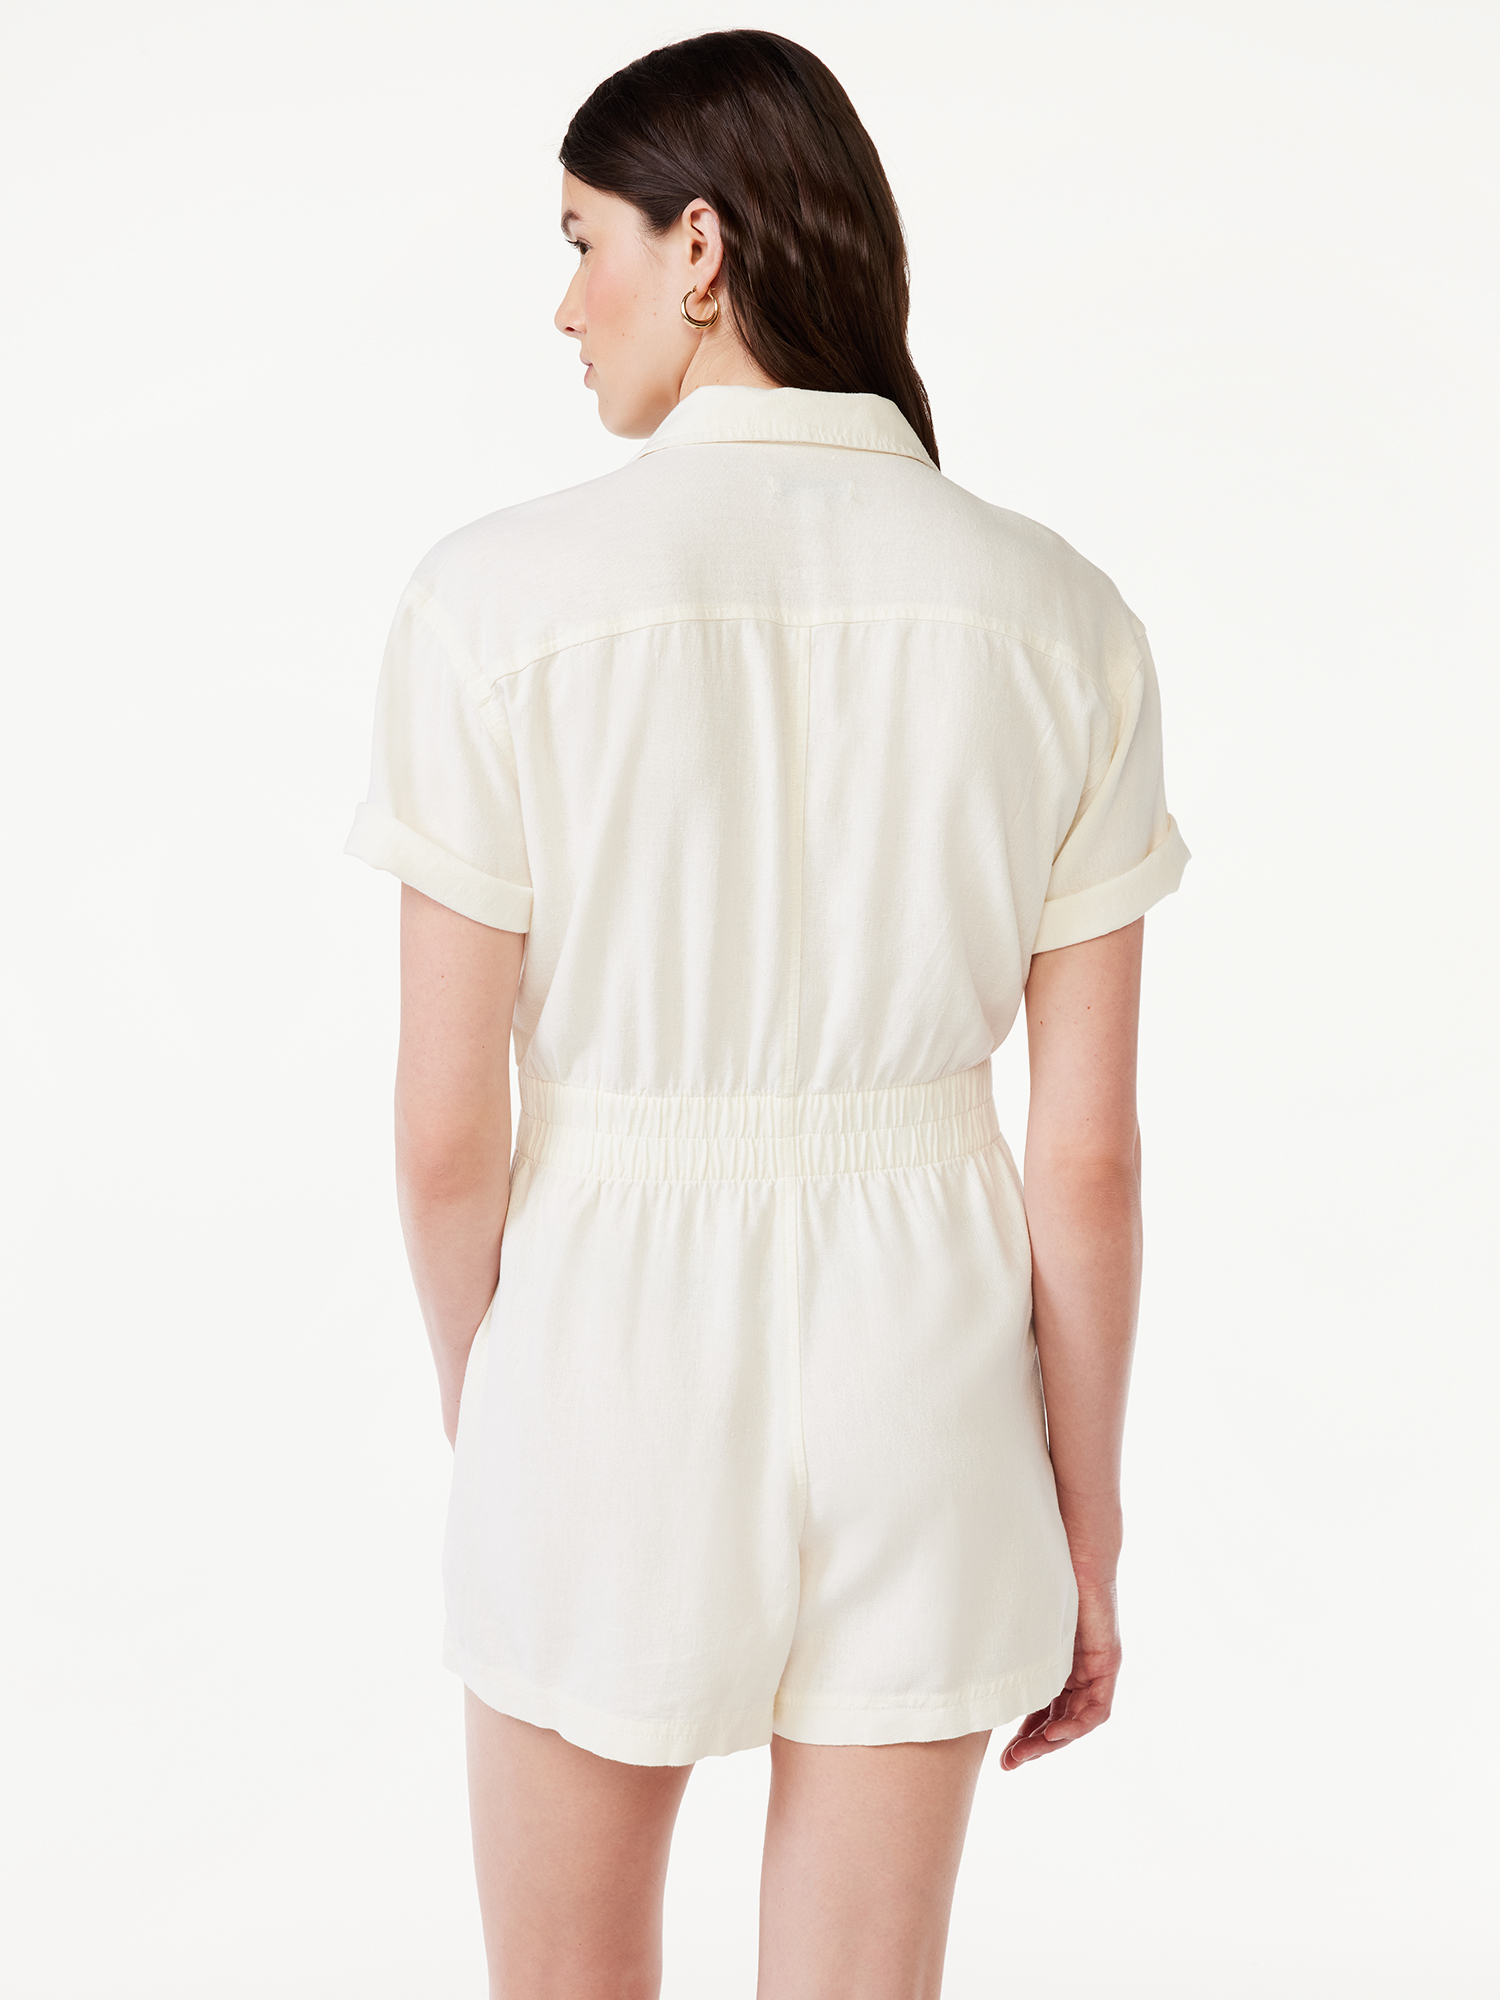 Free Assembly Women's Short Sleeve Romper with Elastic Waist - image 3 of 6